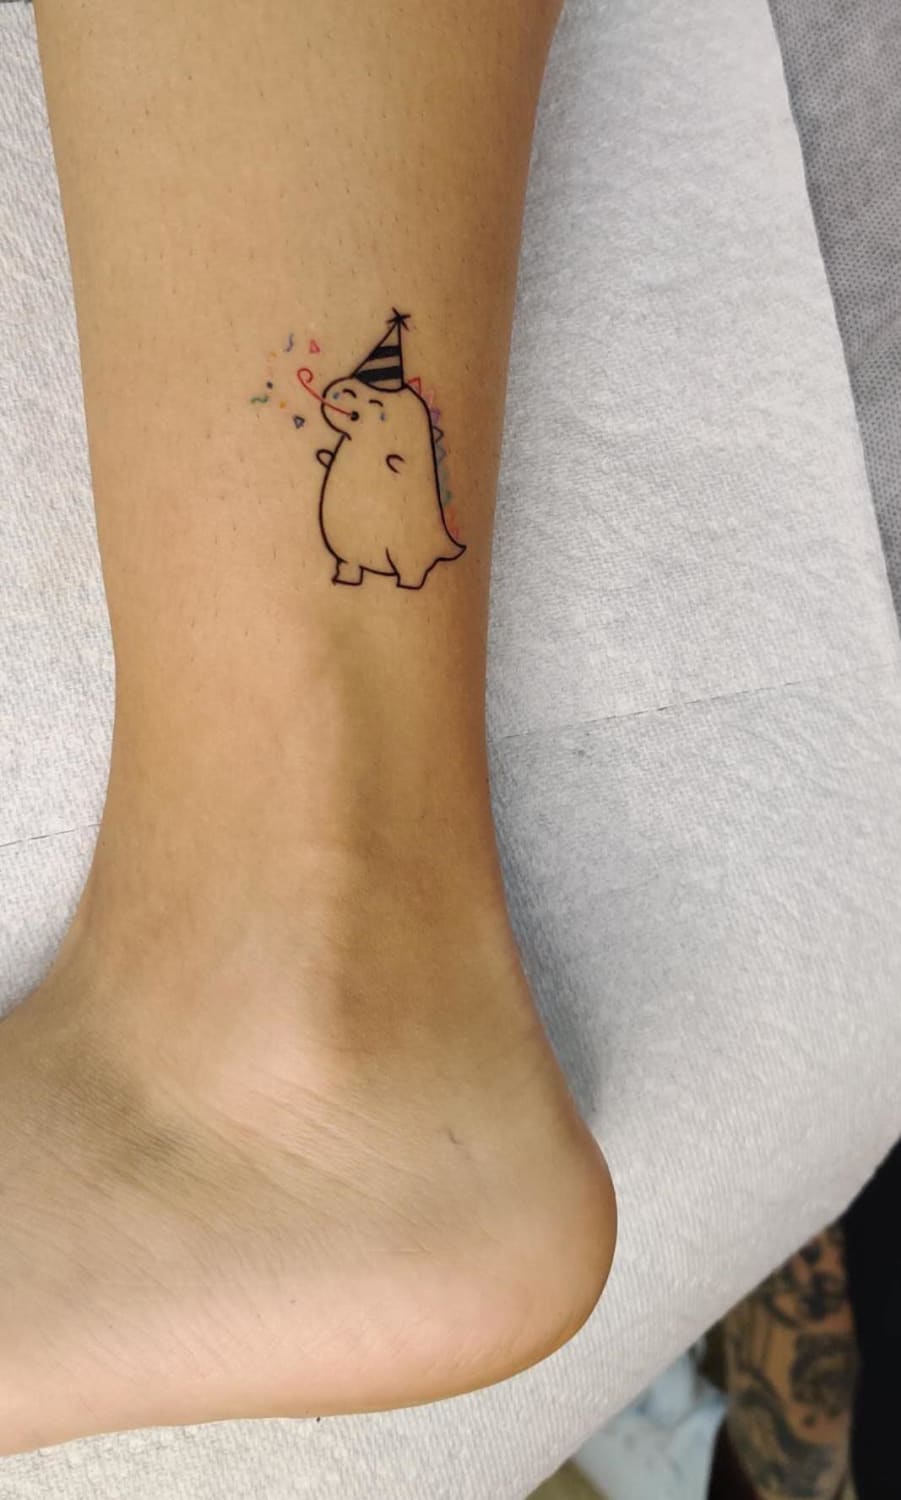 My first one! His name is Yoshi. Done by 圆七, Shenzhen, China